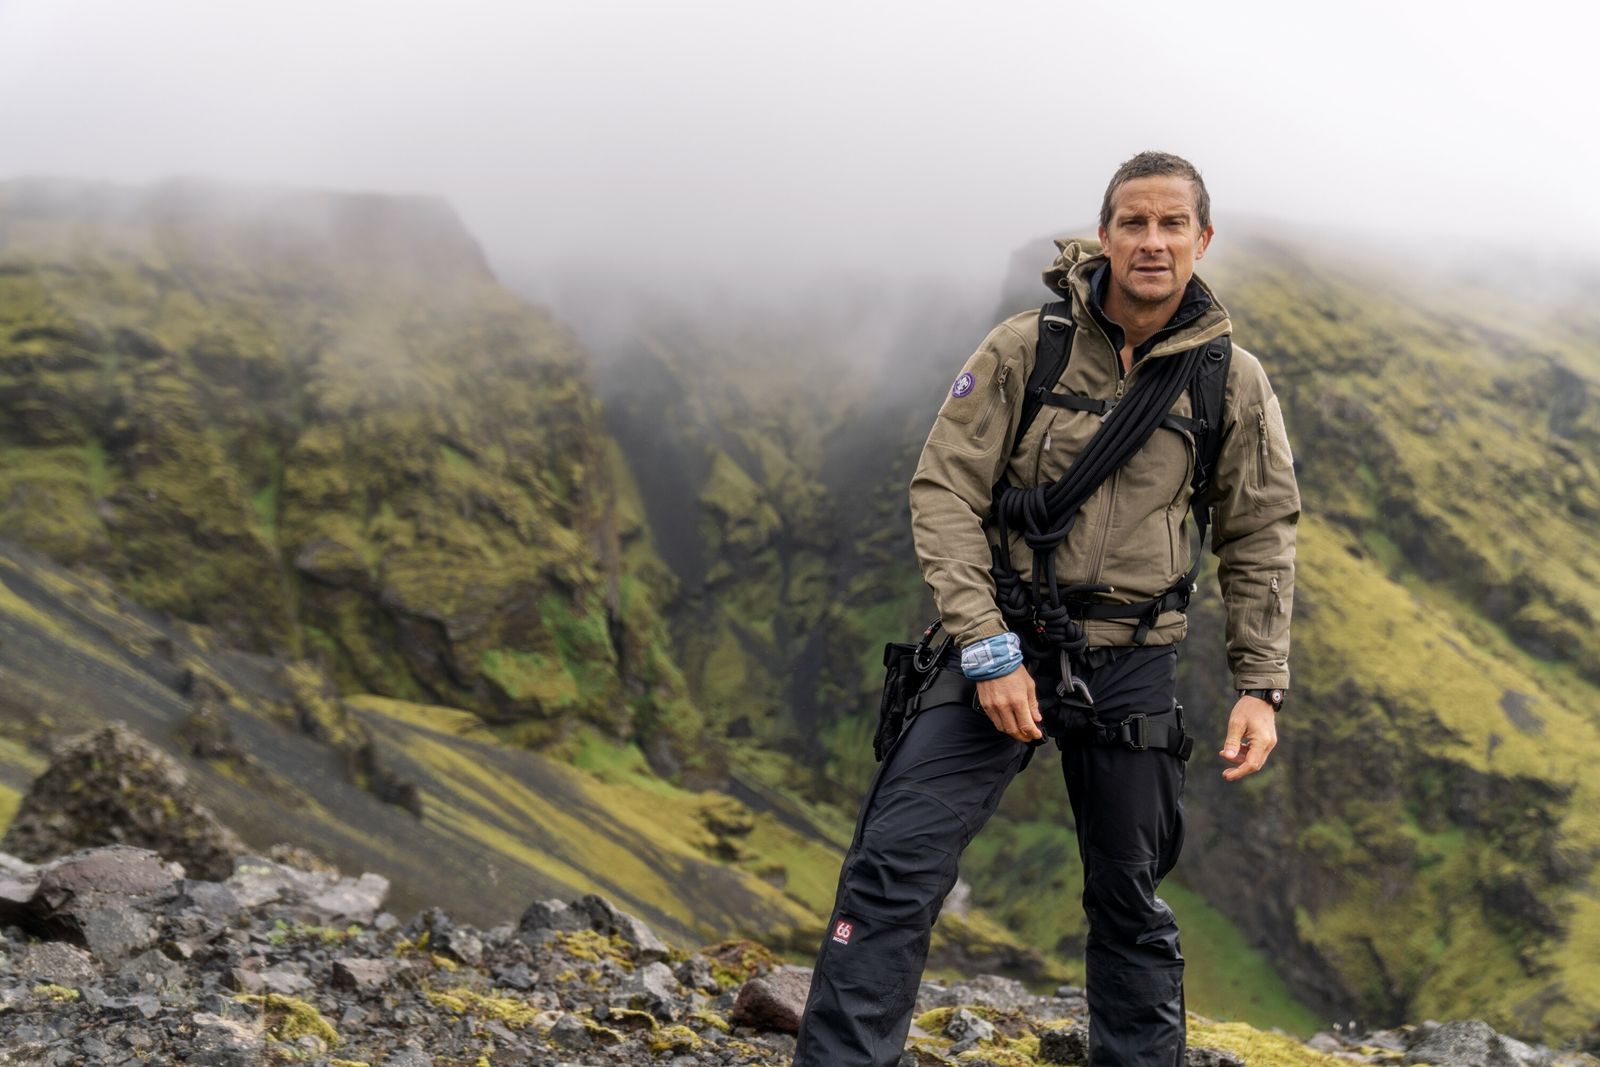 Bear Grylls Military - Before His Survival And Outdoor Adventure